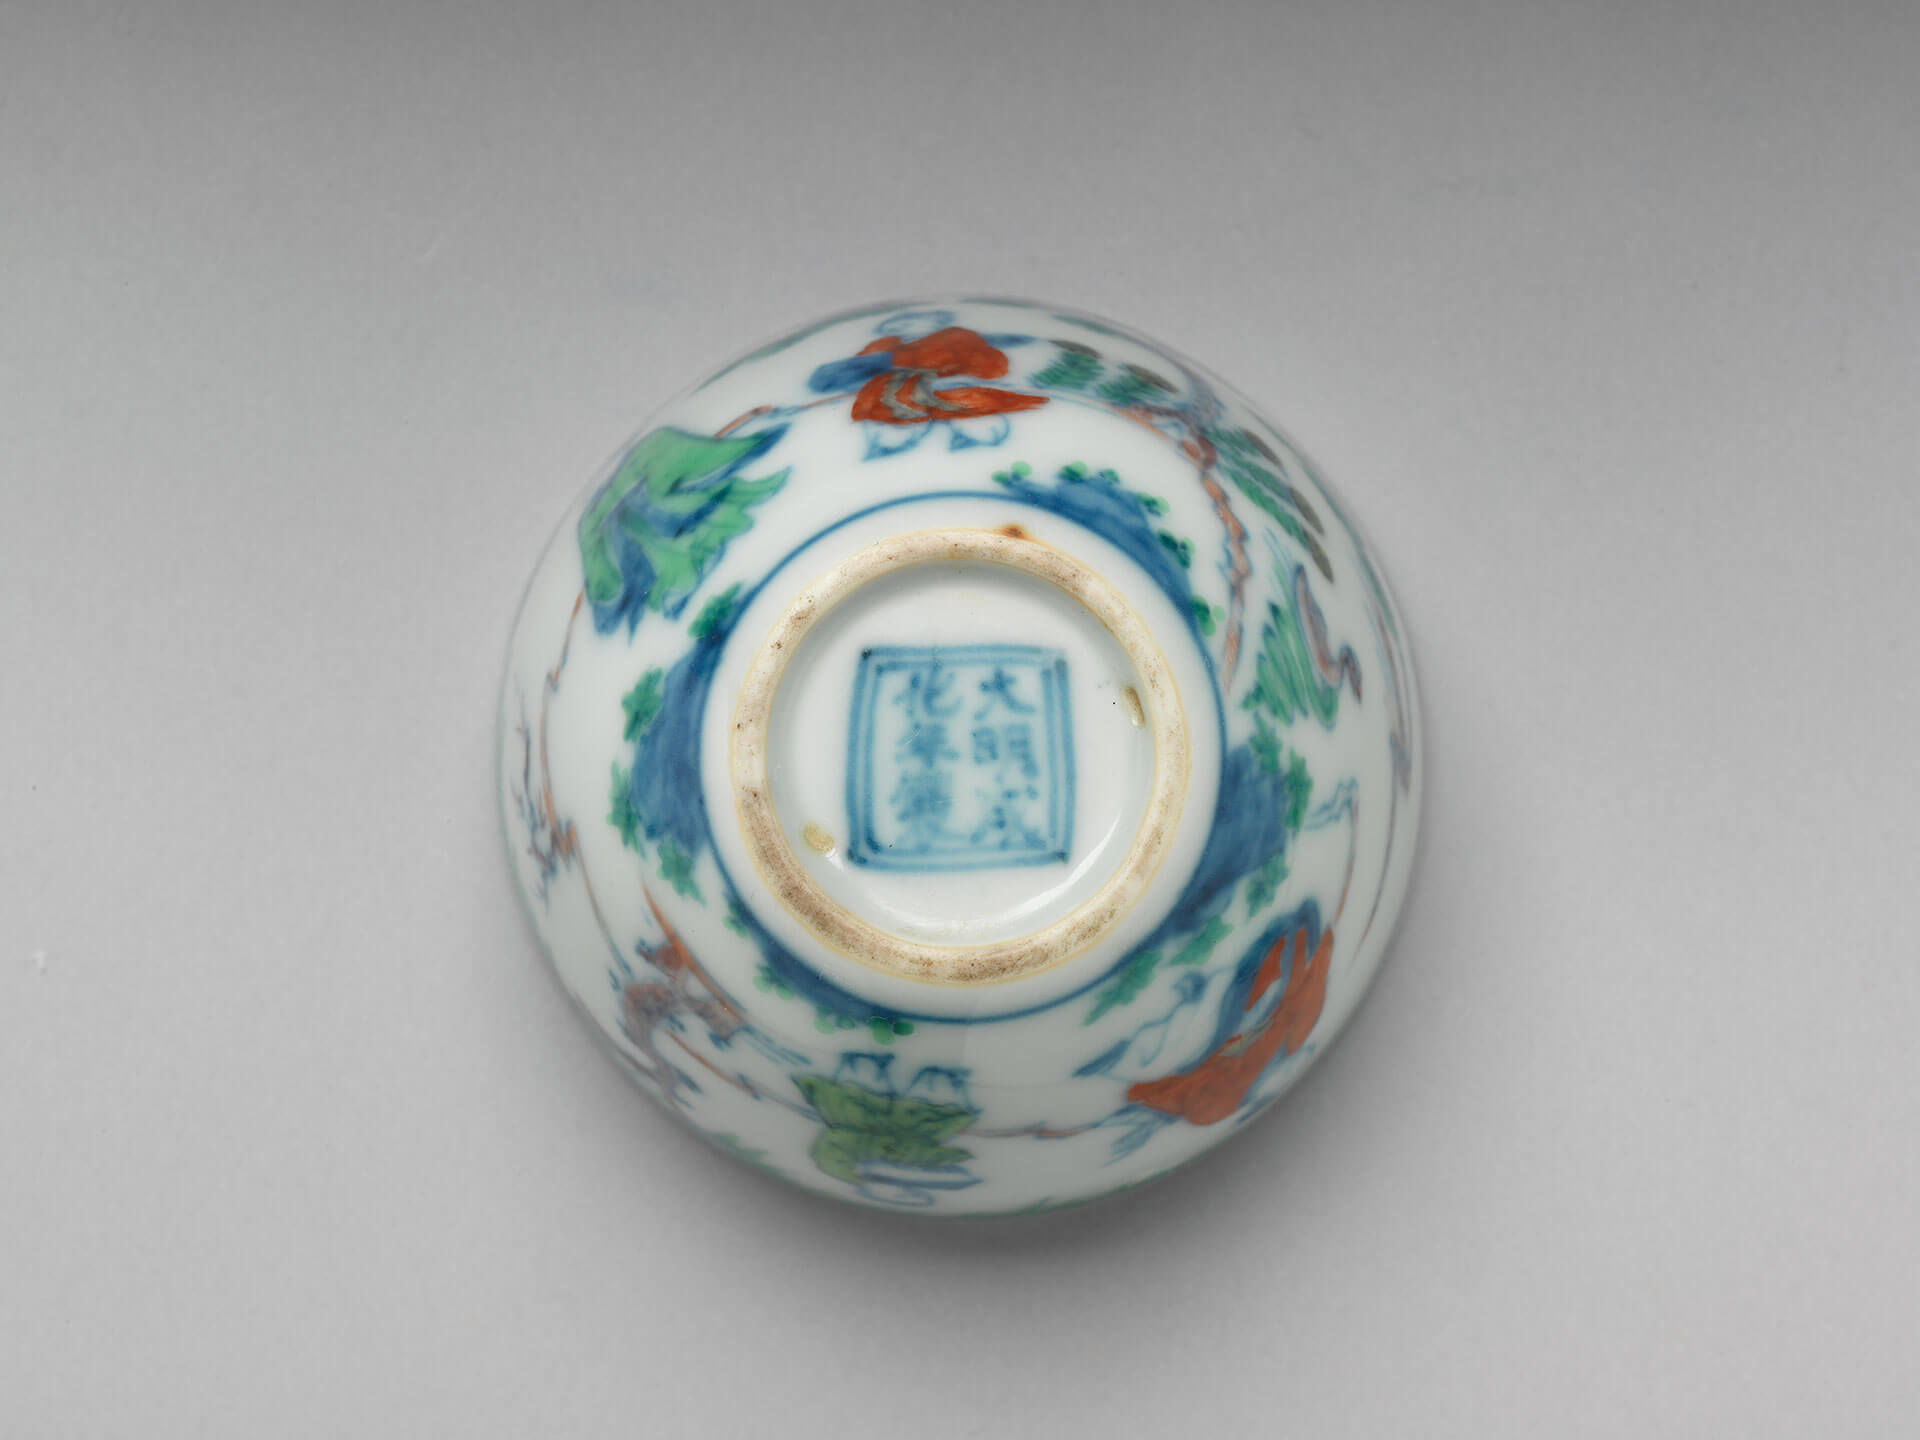 Cup decorated with figures in doucai polychrome enamels